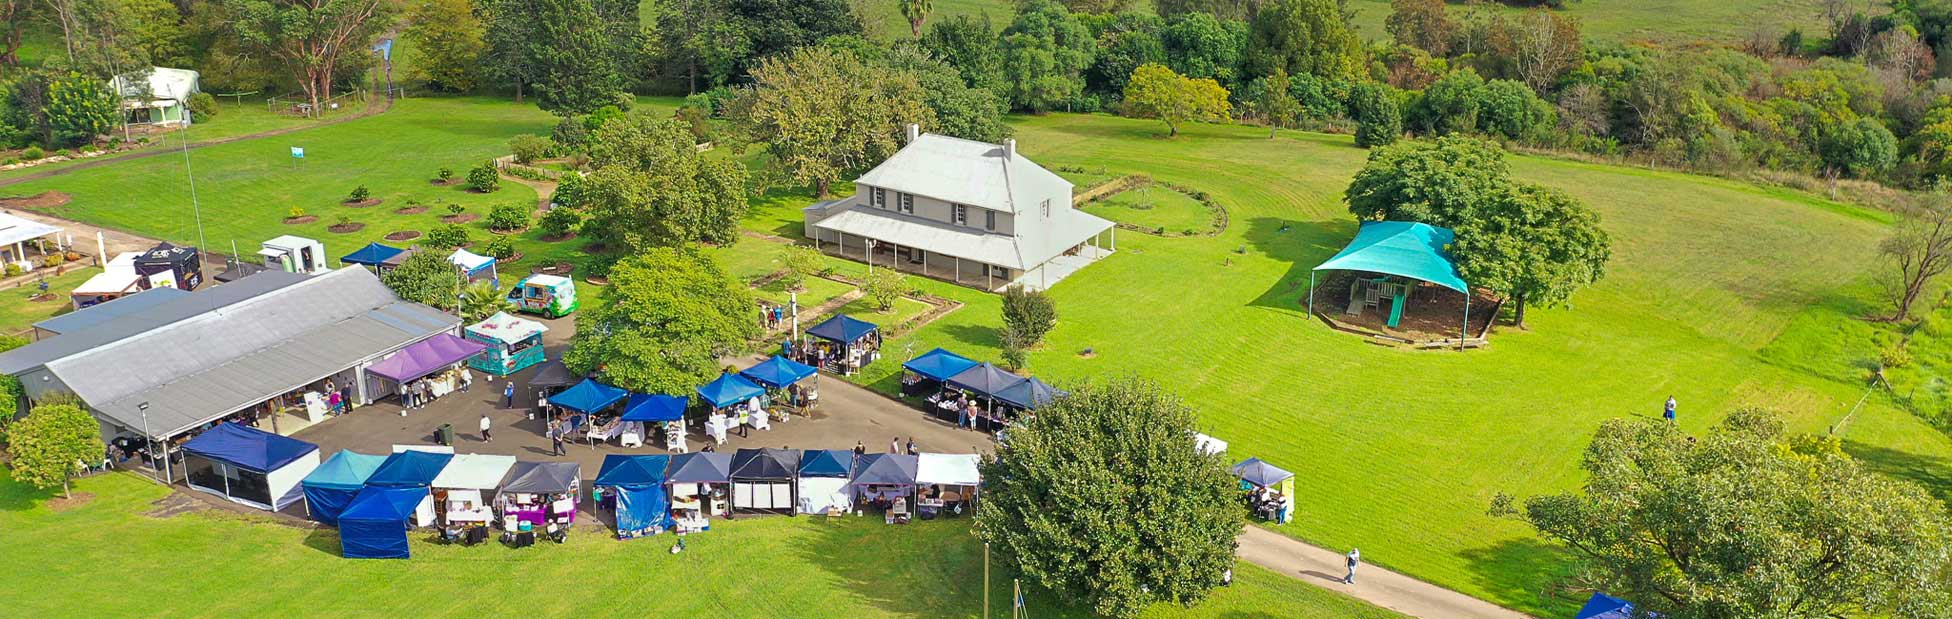 Mamre homestead surrounded by market stalls